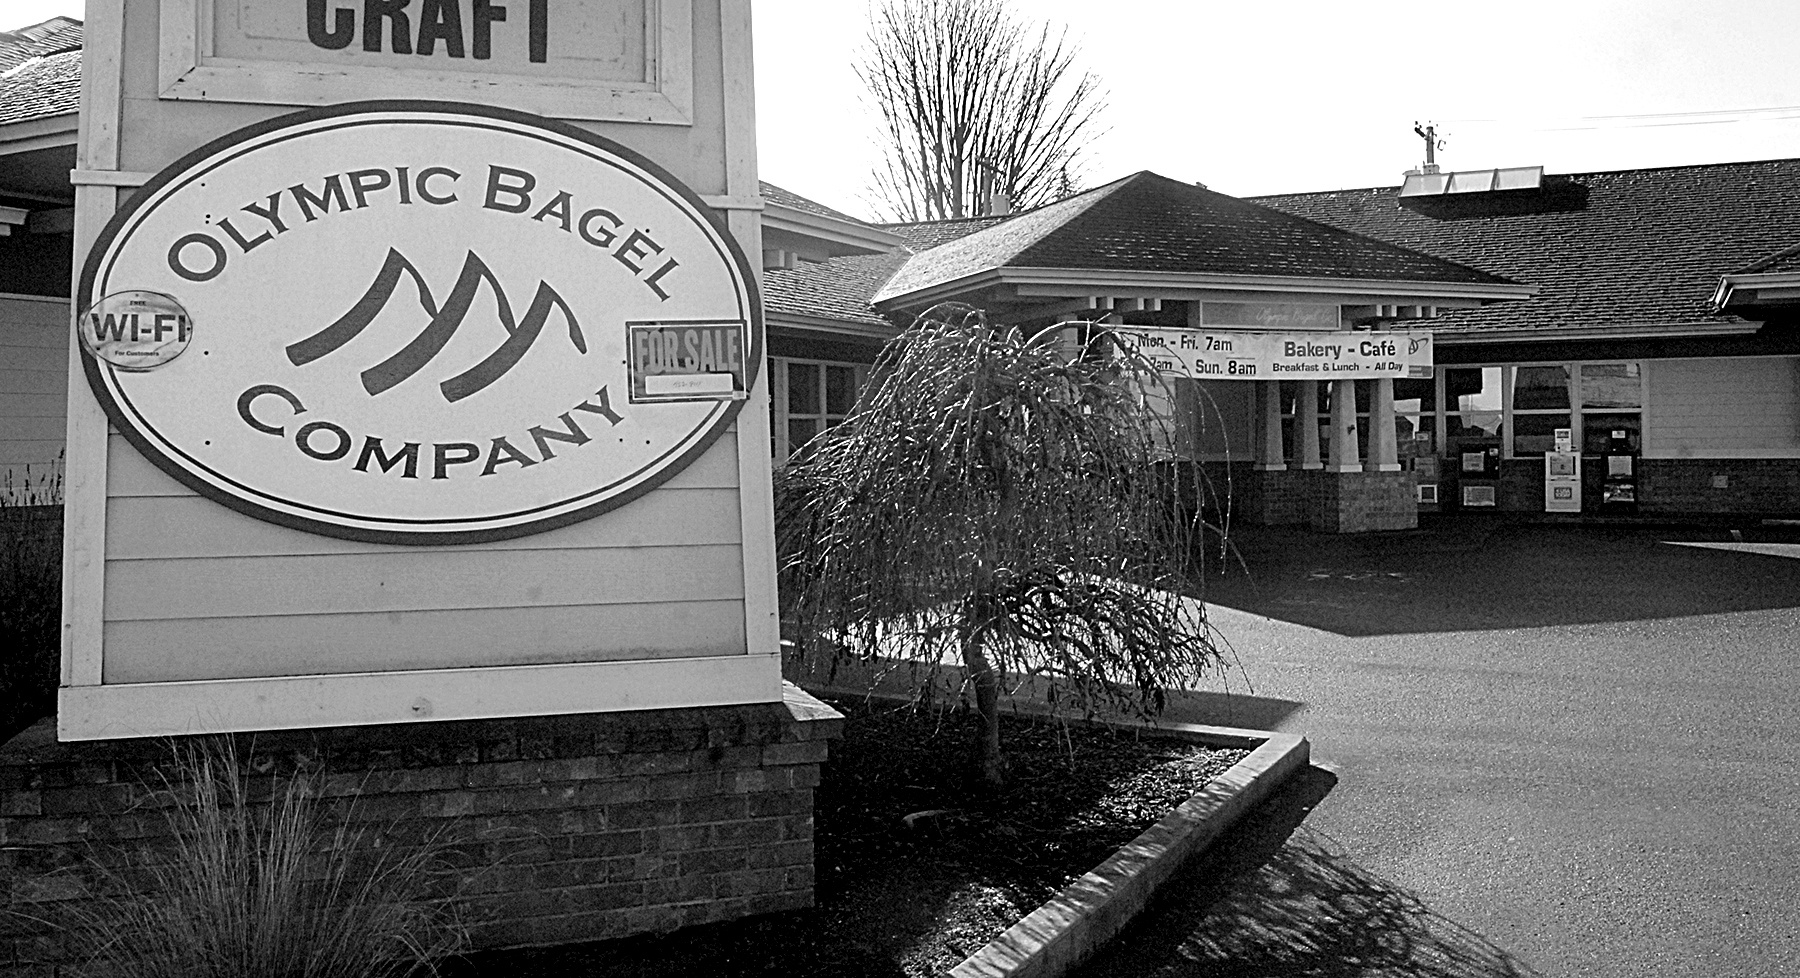 Olympic Bagel Co. on East First Street in Port Angeles sits closed Saturday after the eatery and bagel shop was closed and put up for sale. (Keith Thorpe/Peninsula Daily News)